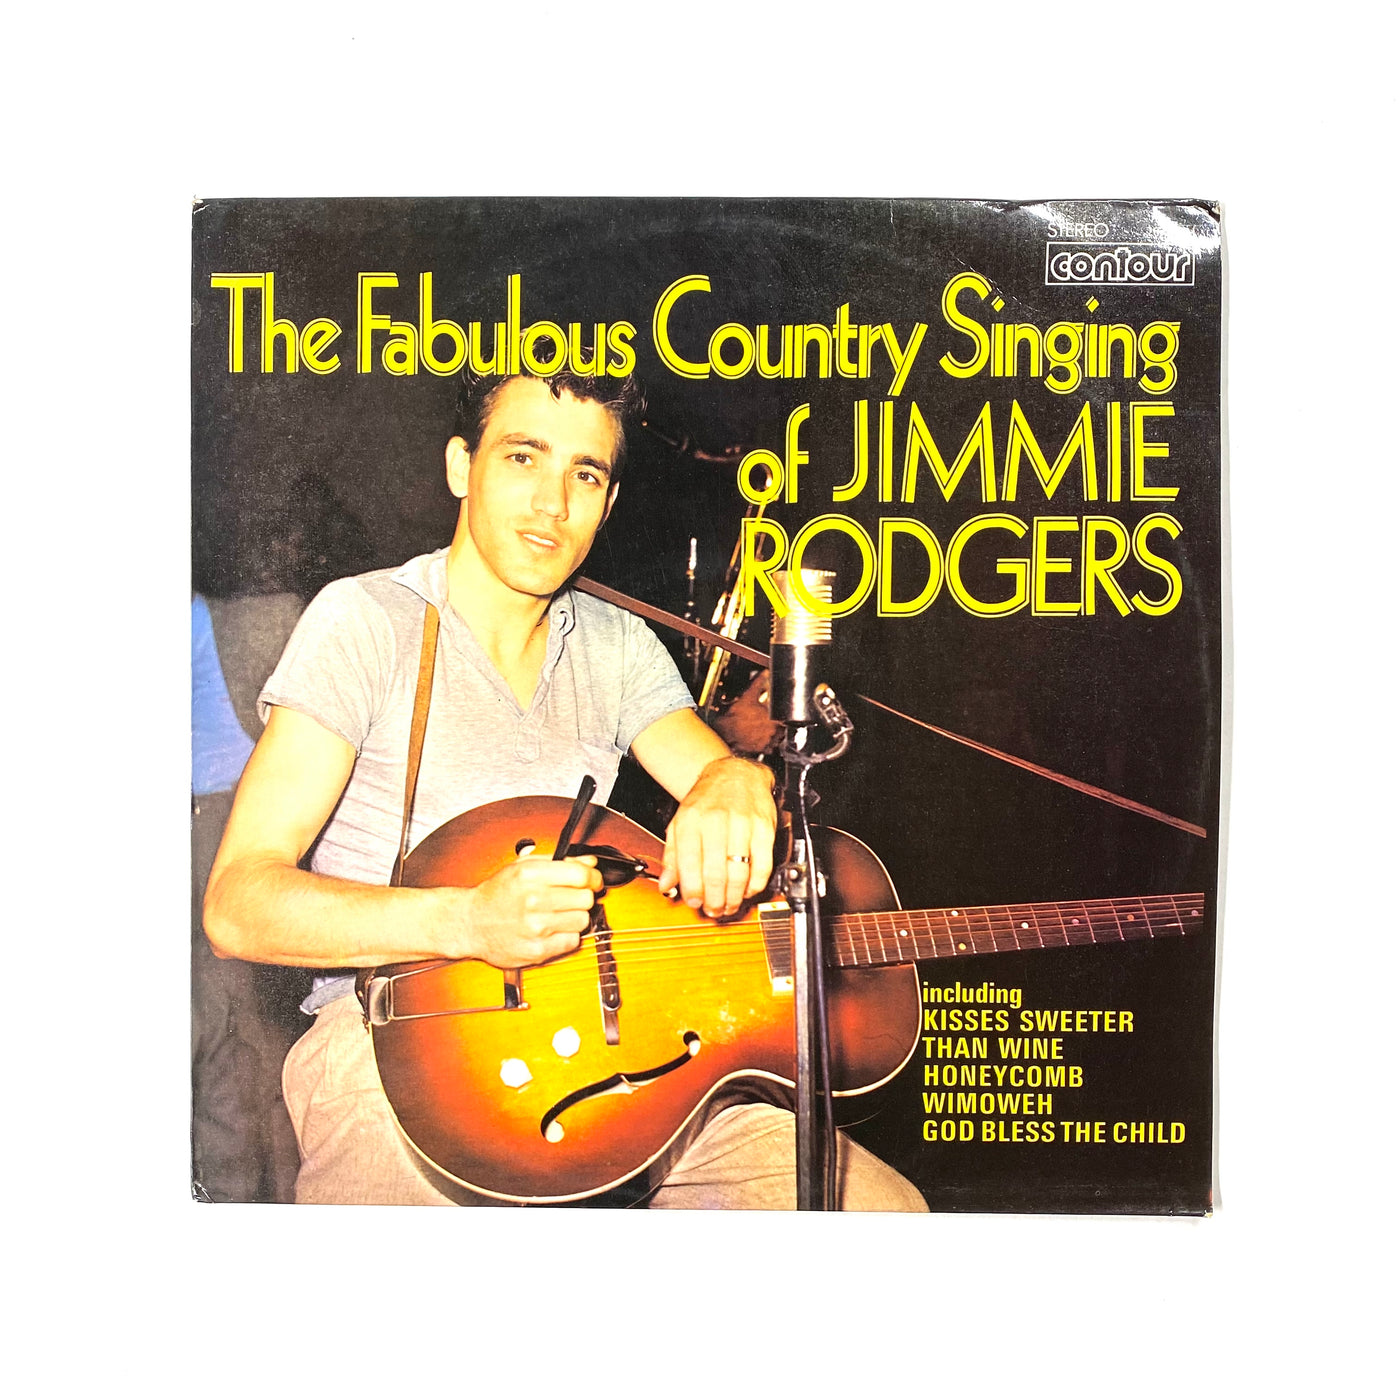 Jimmie Rodgers - The Fabulous Country Singing of Jimmie Rodgers